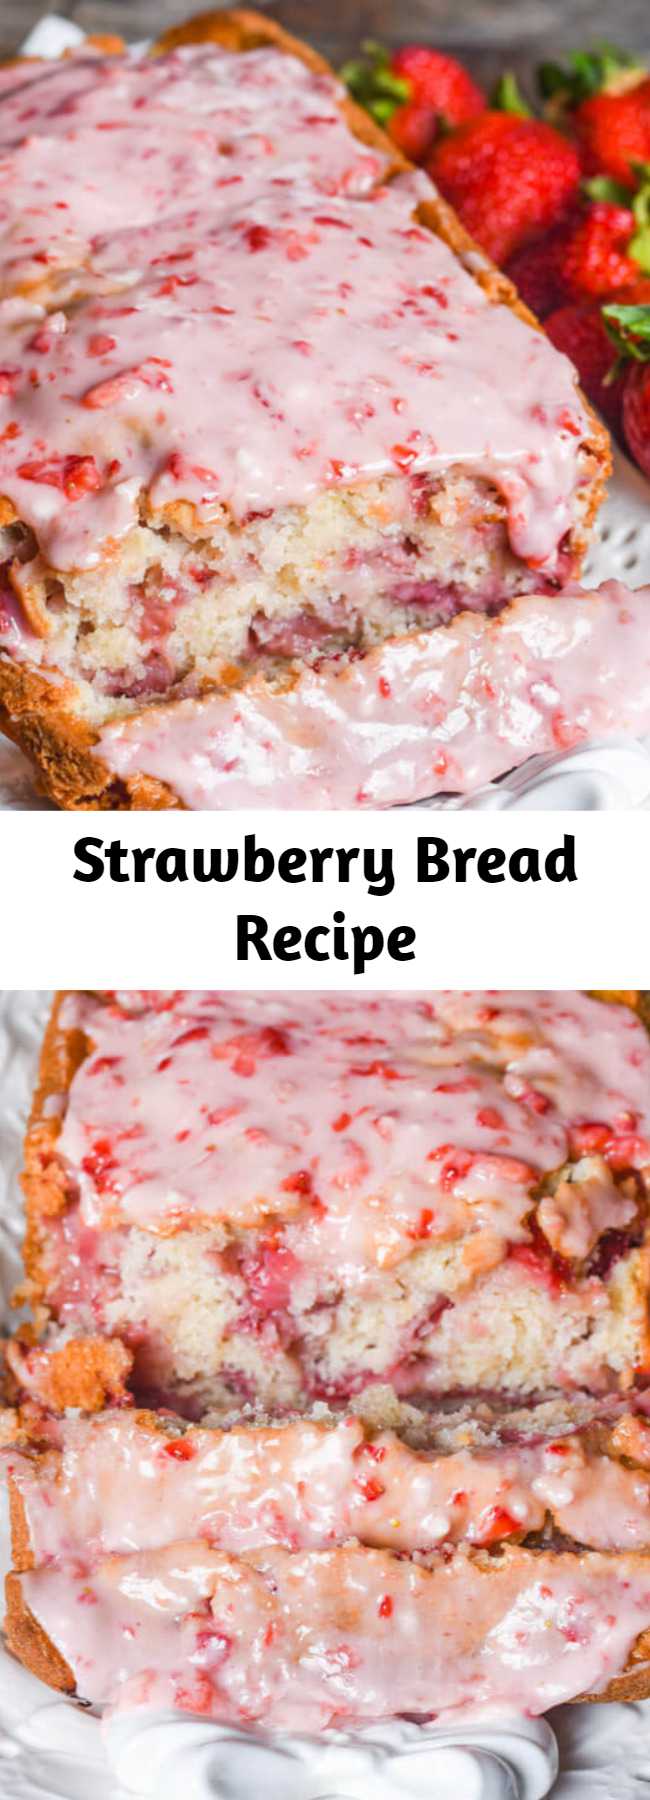 Strawberry Bread Recipe - Try this fresh strawberry bread with melt-in-your-mouth strawberry glaze. This quick bread recipe comes together in just 10 minutes. If you love fruit breads, you'll also love our cherry bread!